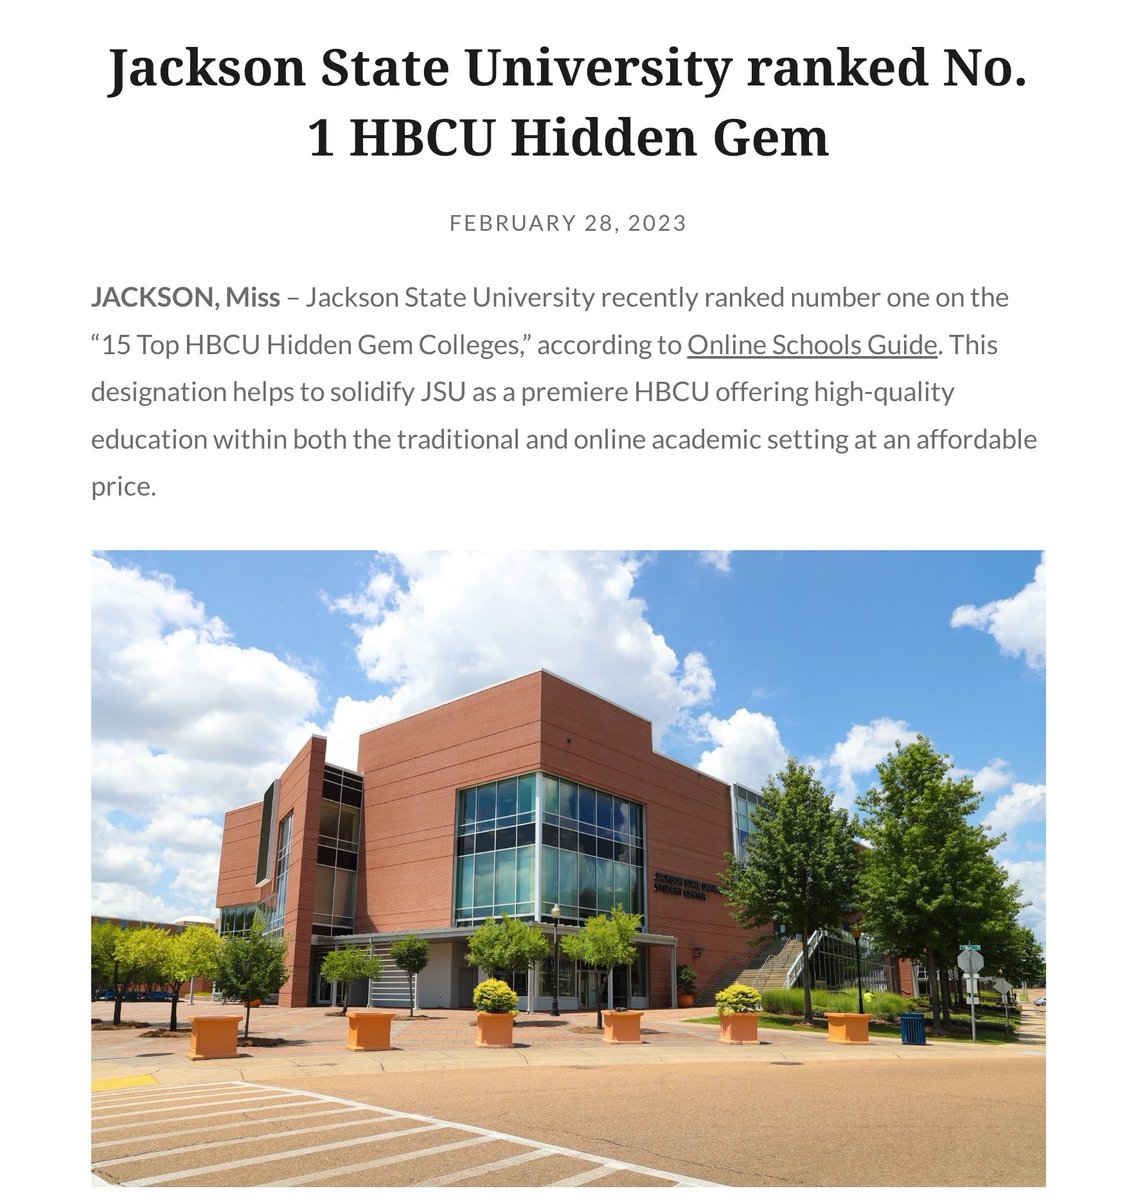 #JSUElevate: 'Jackson State University recently ranked number one on the “15 Top HBCU Hidden Gem Colleges,” according to Online Schools Guide.'
southernlaced.com/2023/02/28/jac…